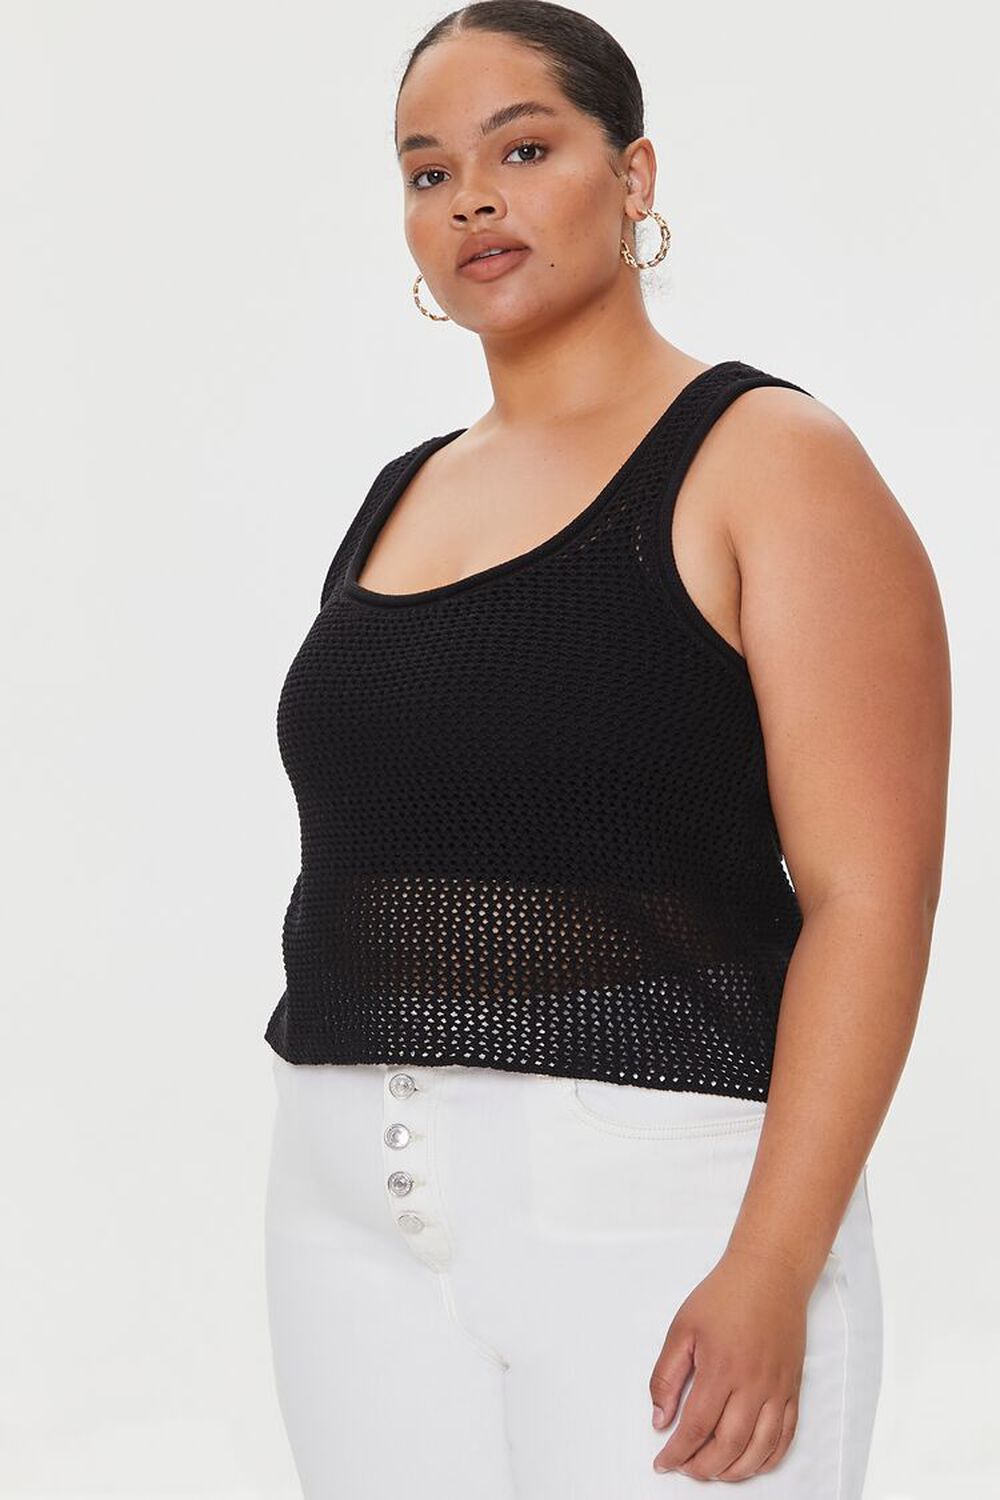 BLACK Plus Size Netted Tank Top, image 1